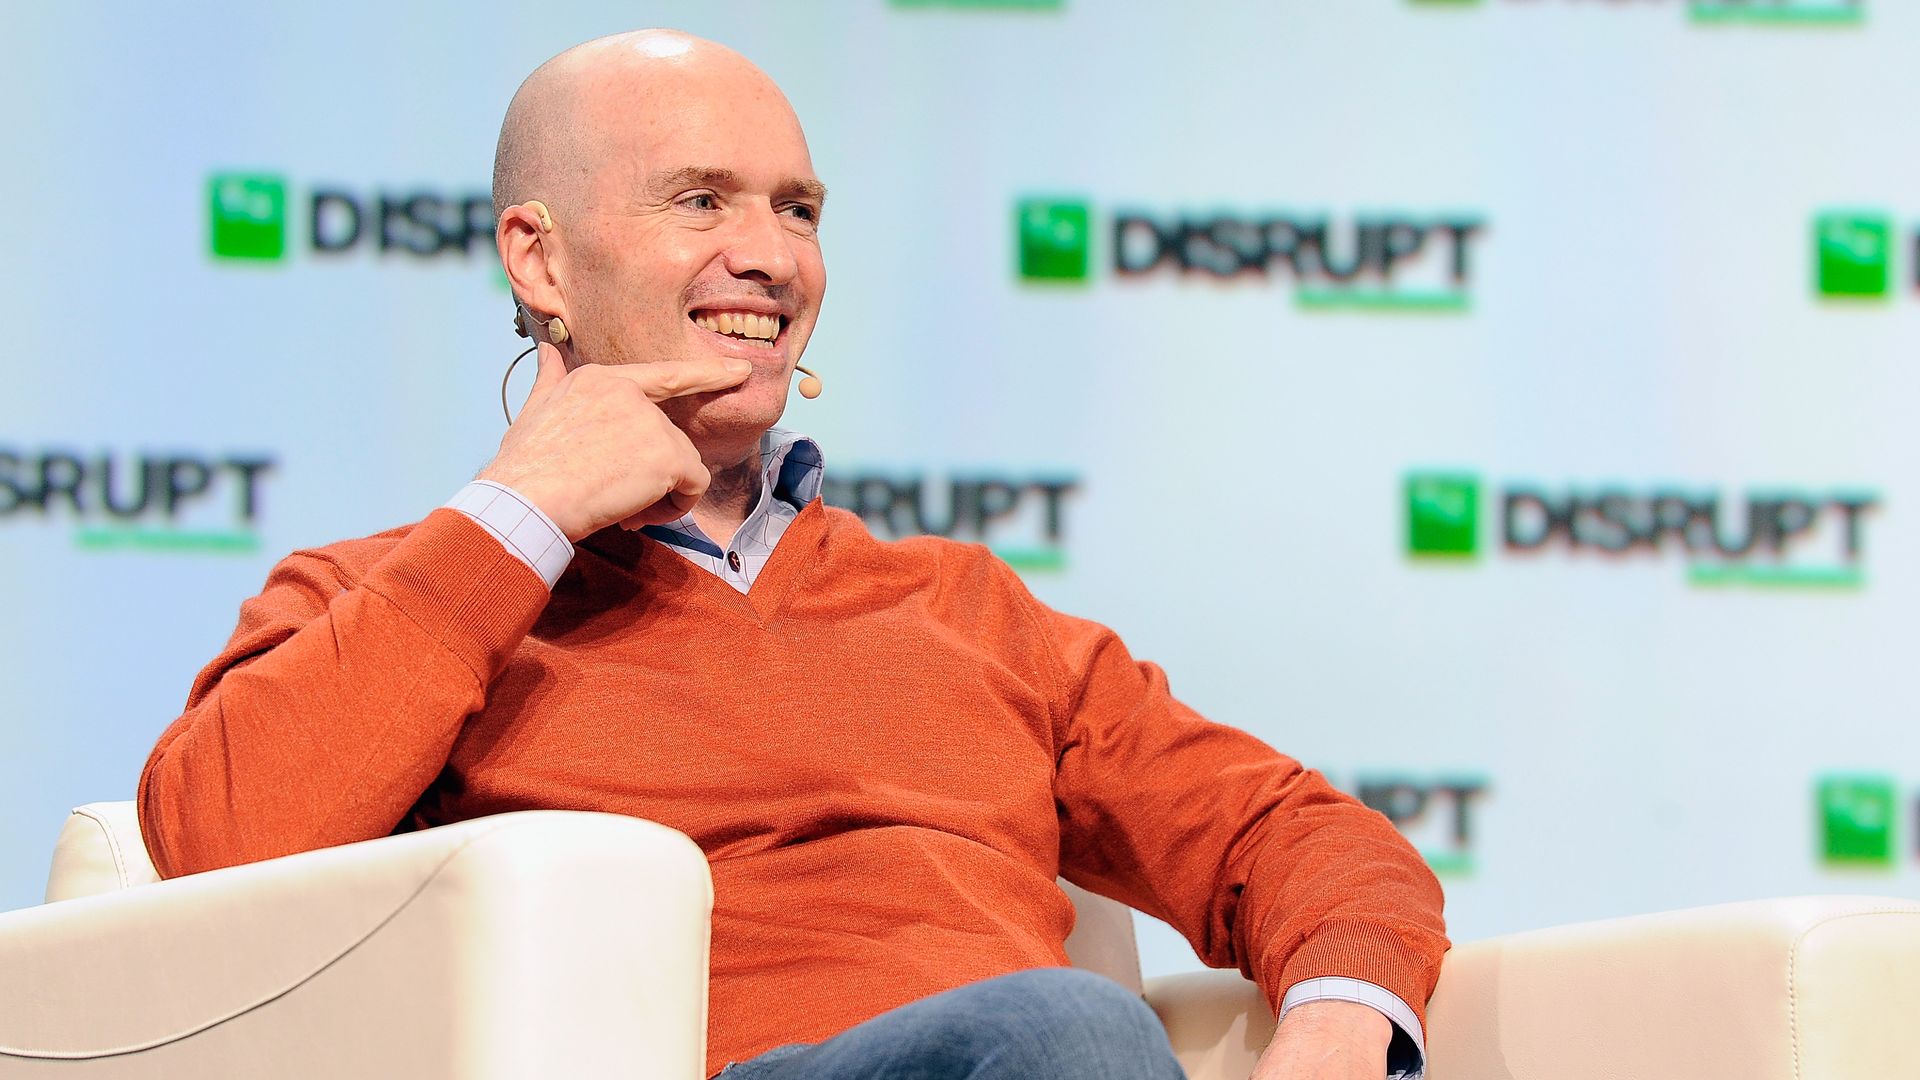 In this image, Andreessen Horowitz sits in a chair and speaks.